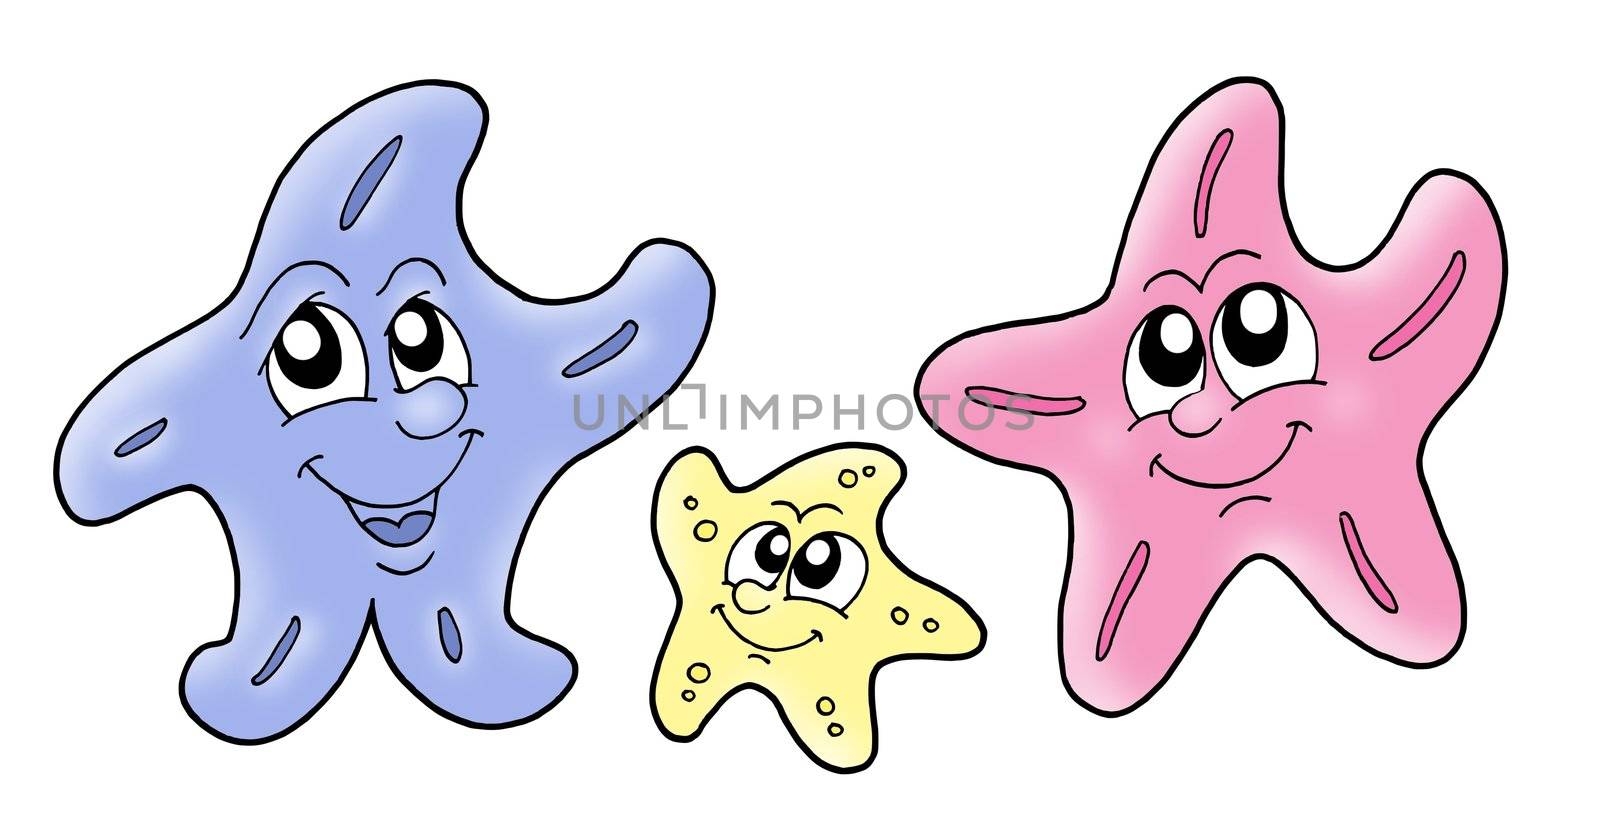 Starfish family - color illustration, blue, yellow, red.